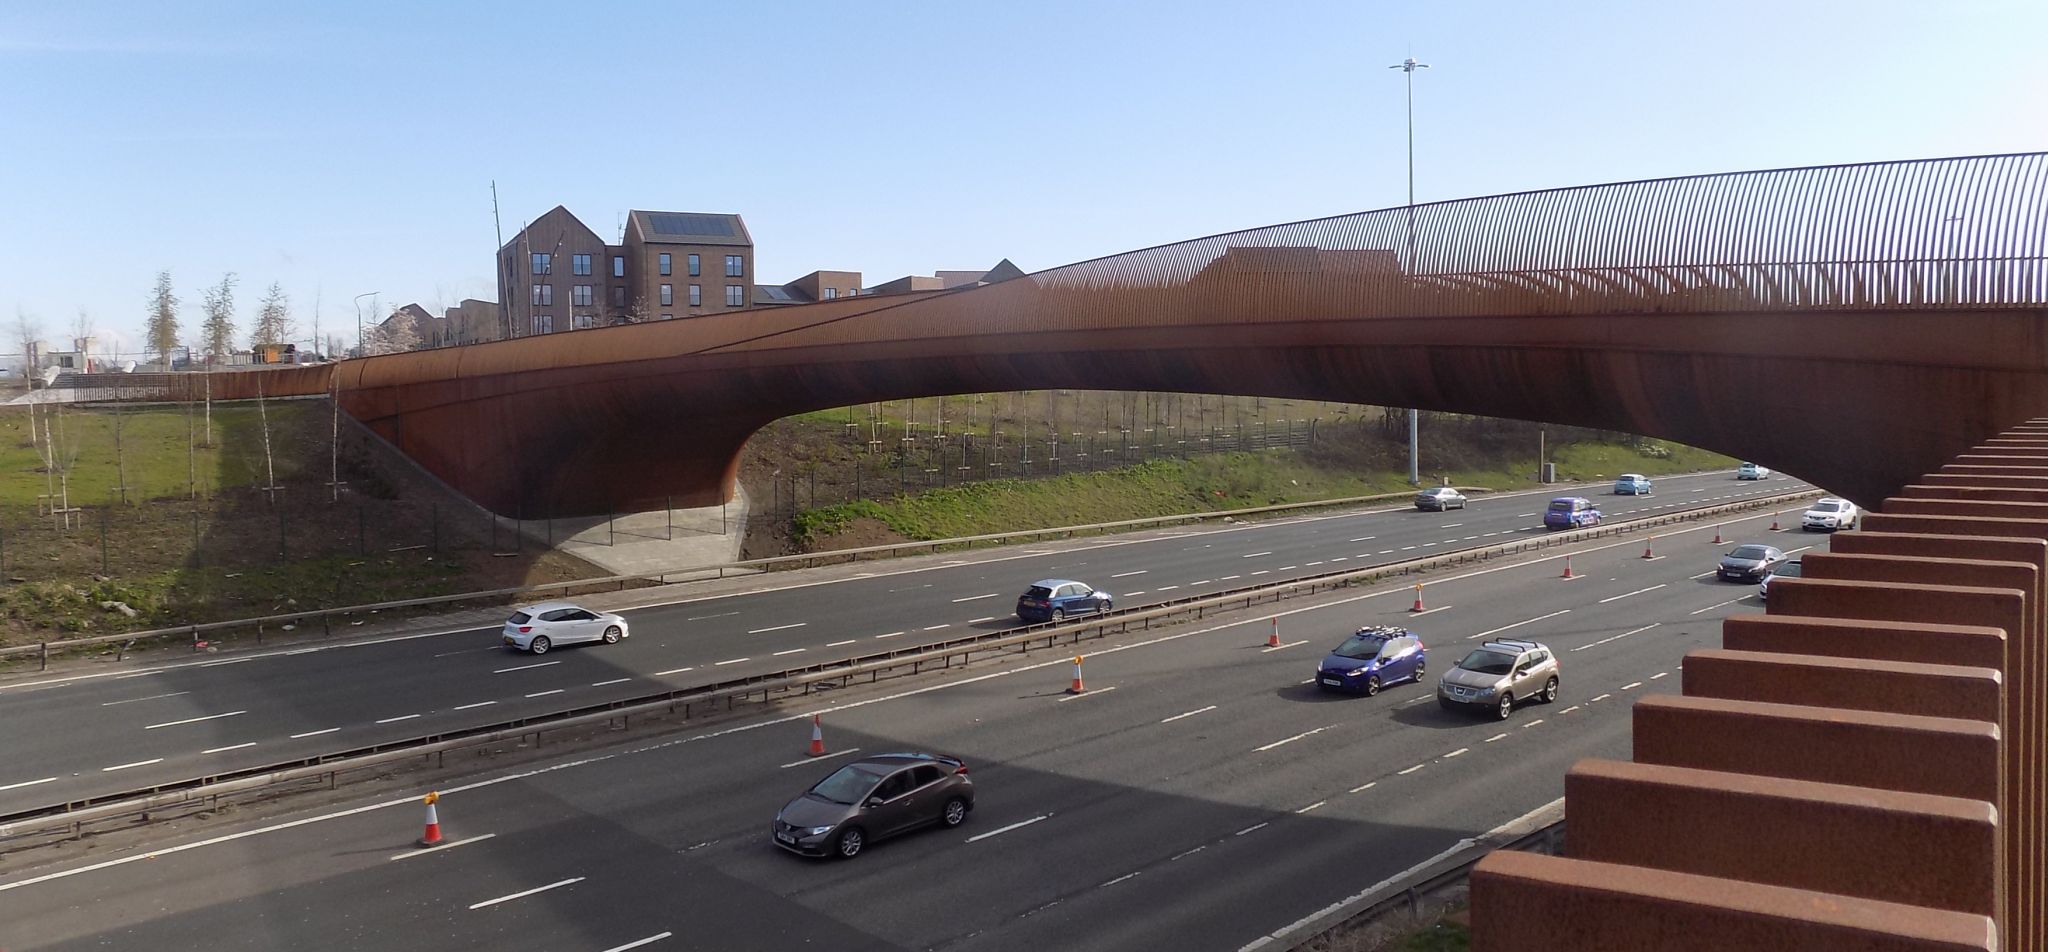 Sighthill Bridge over the M8